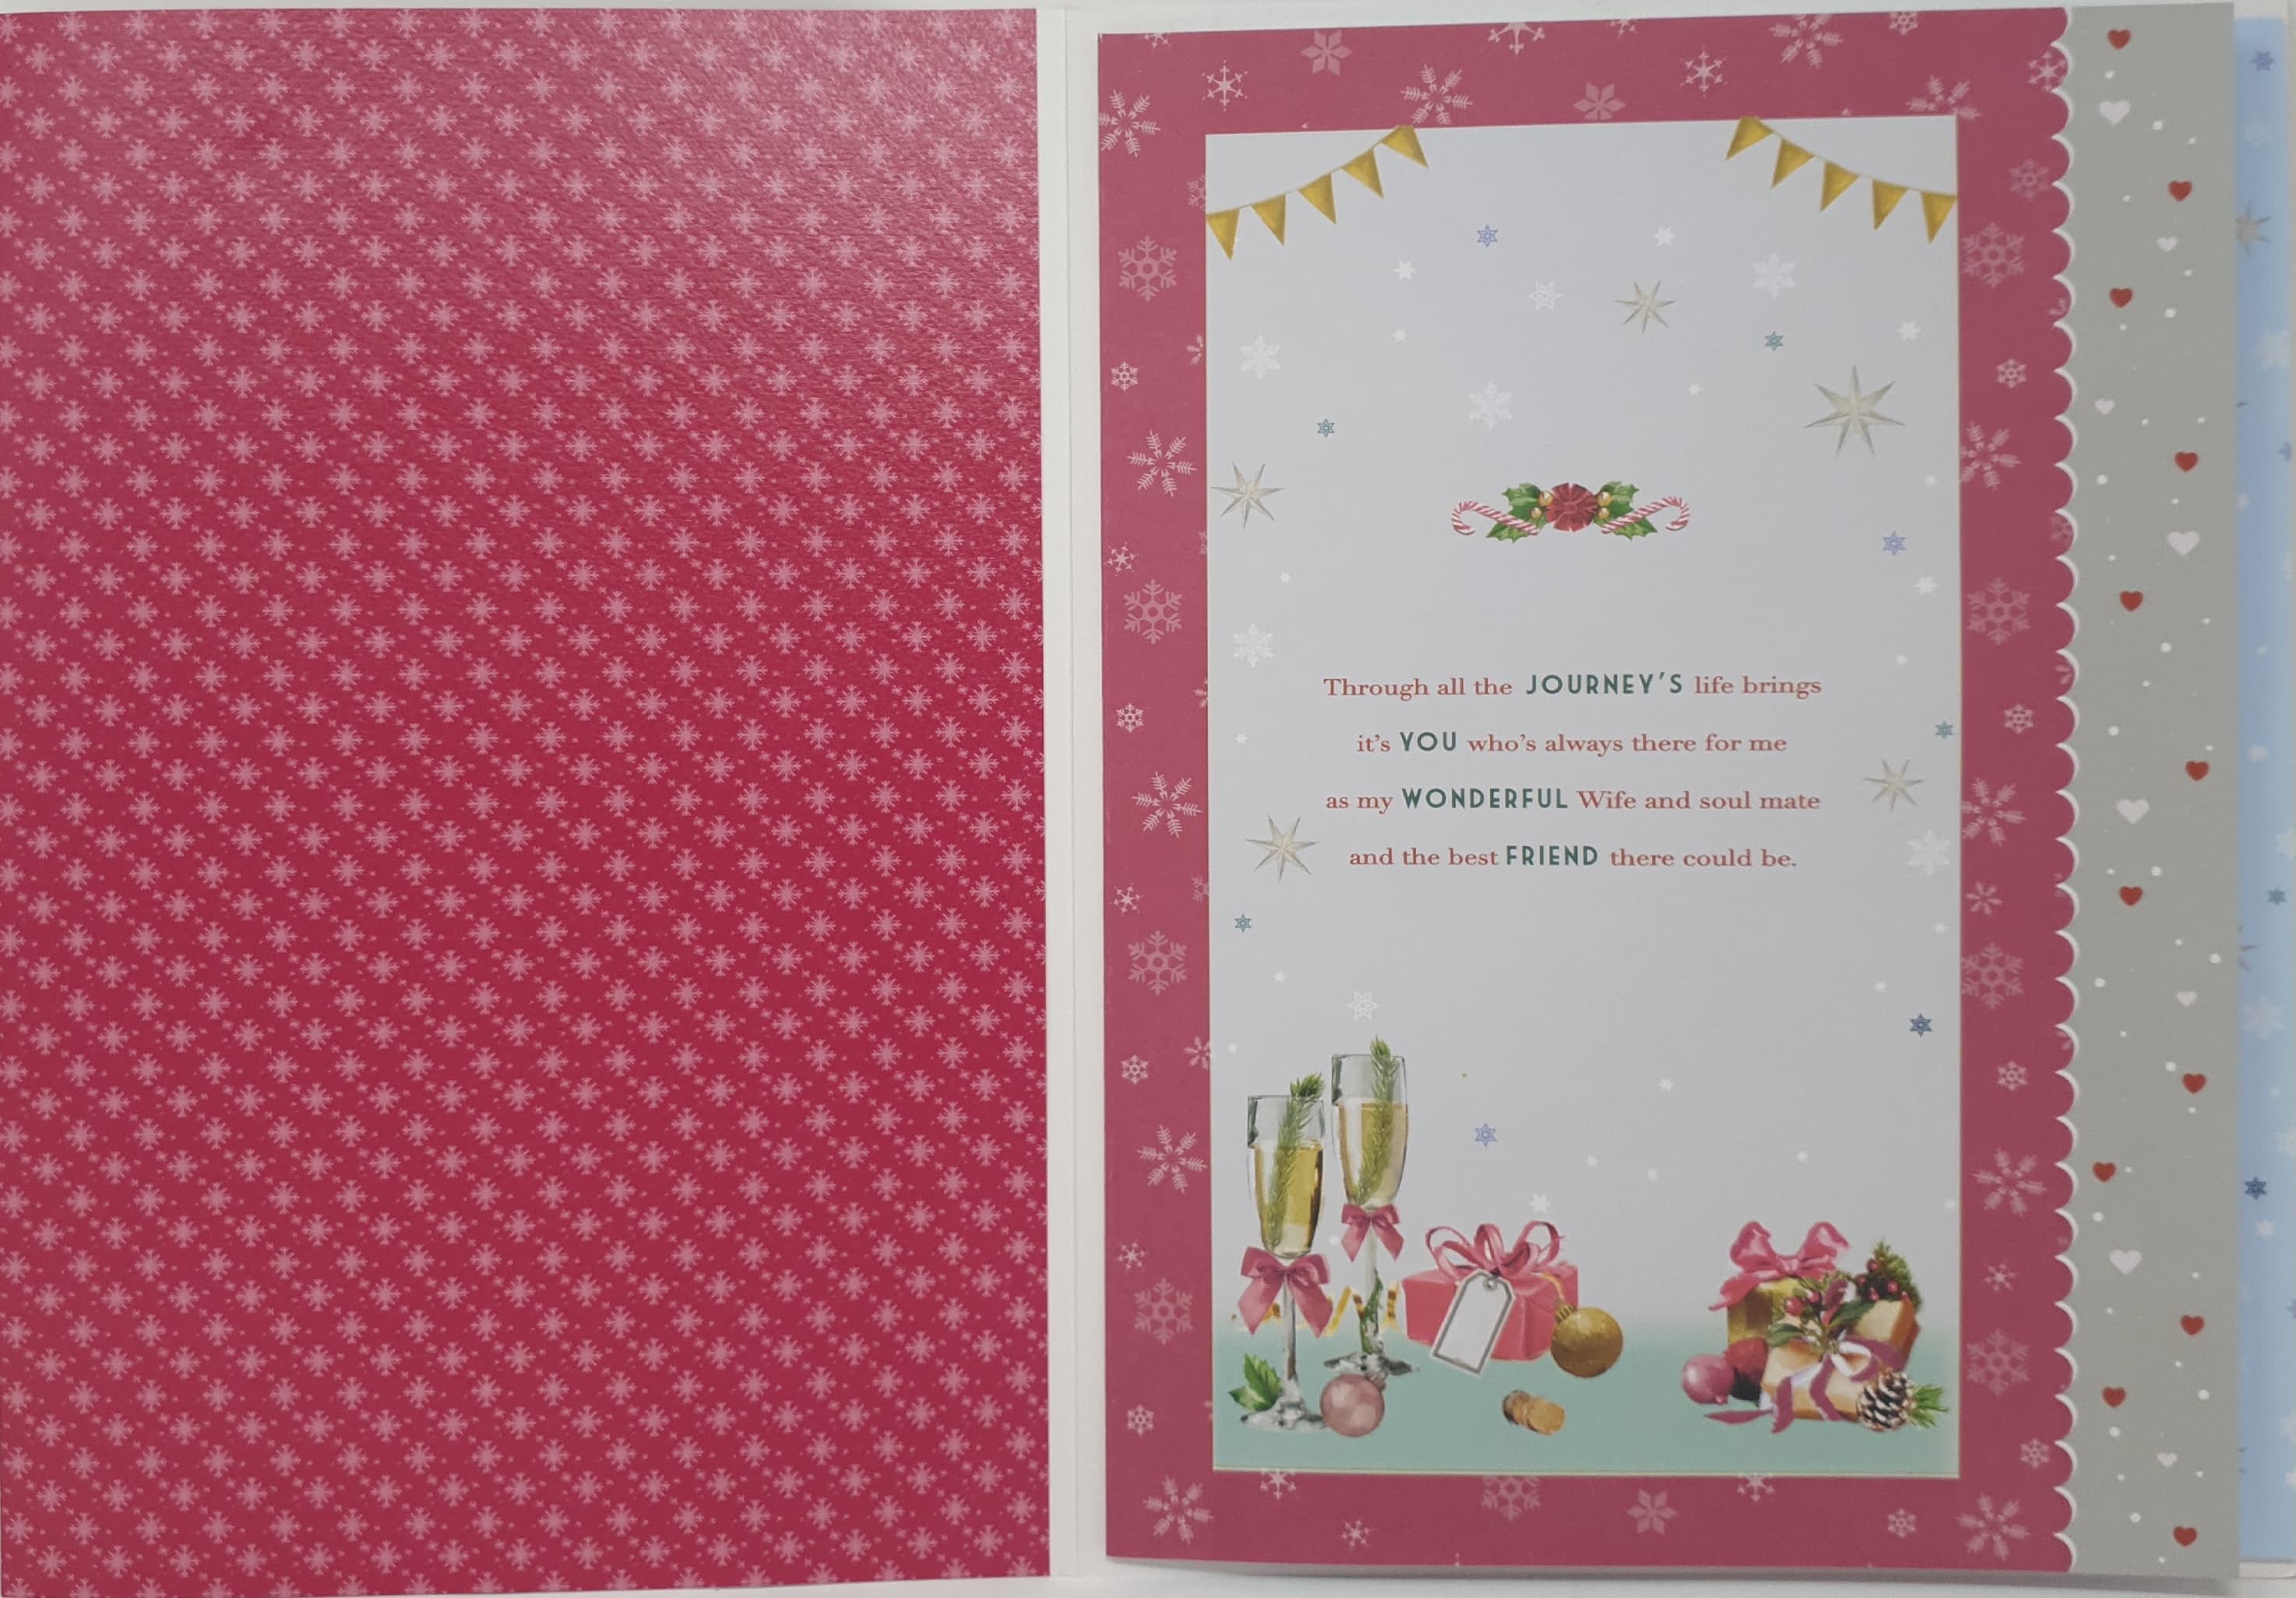 Wife Christmas Card - Champagne Glasses, Red Heart & Decorations (Card In A Presentation Box)